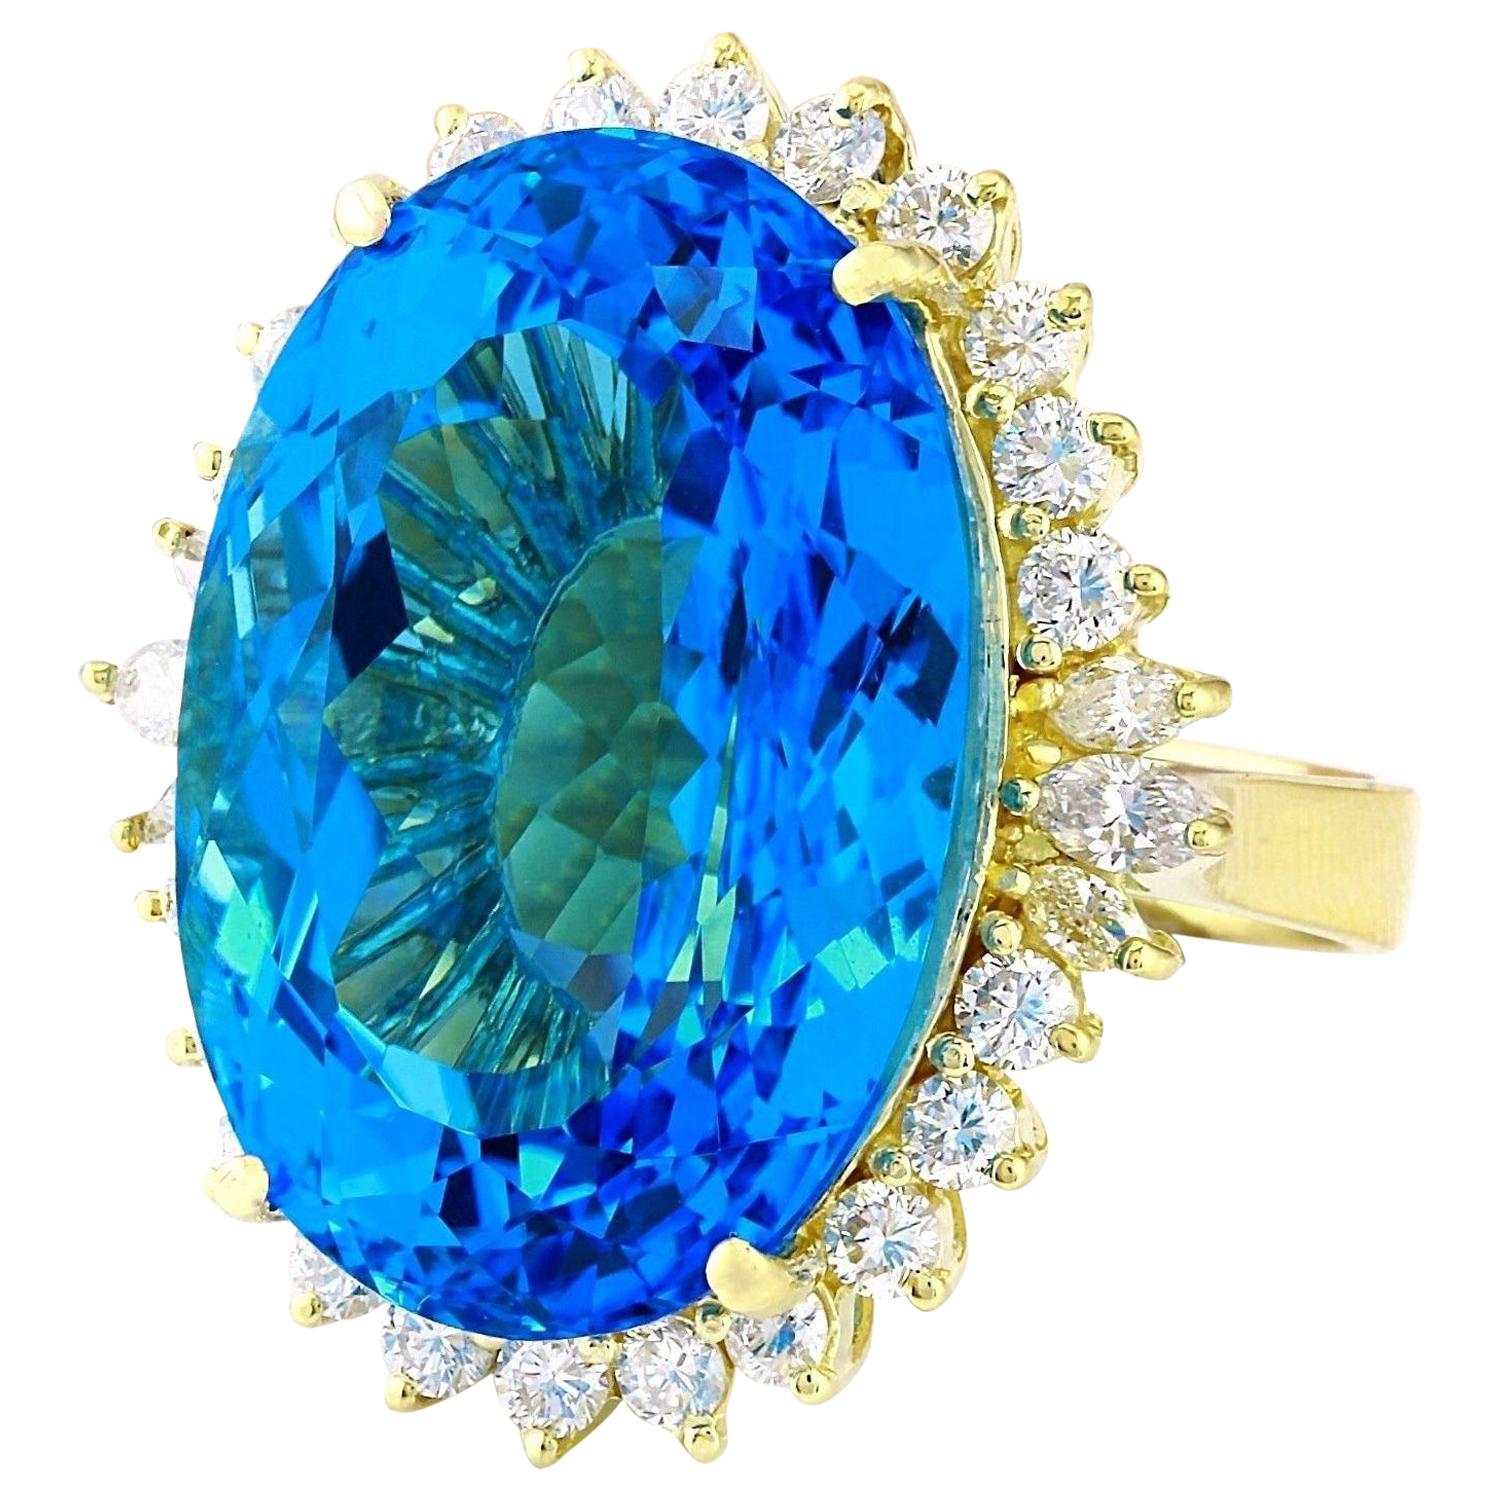 39.25 Carat Natural Topaz 14K Solid Yellow Gold Diamond Ring
 Item Type: Ring
 Item Style: Cocktail
 Material: 14K Yellow Gold
 Mainstone: Topaz
 Stone Color: Blue
 Stone Weight: 38.00 Carat
 Stone Shape: Oval
 Stone Quantity: 1
 Stone Dimensions: